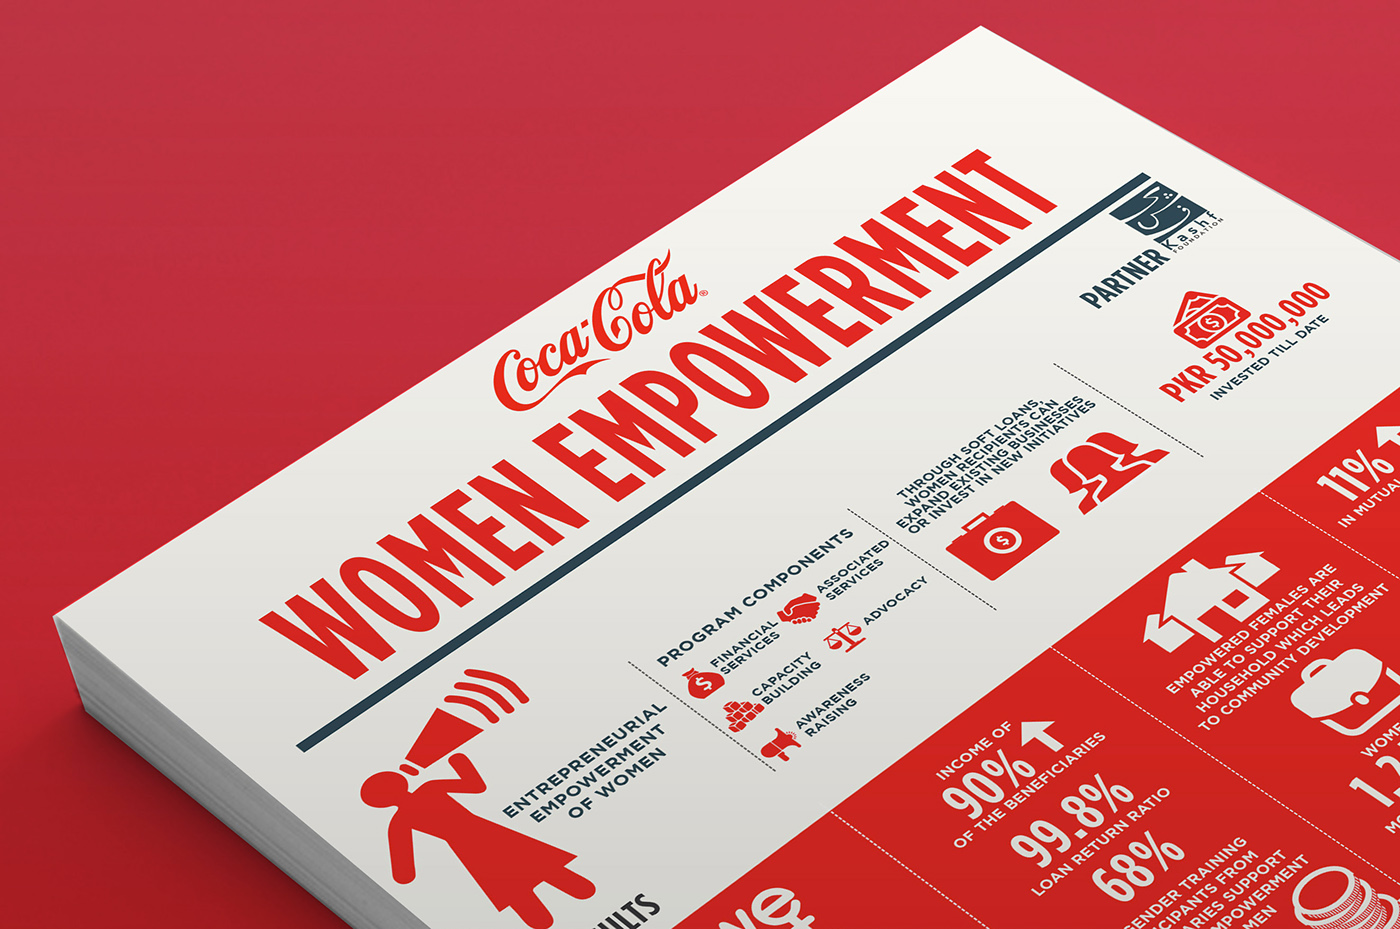 Coca-Cola infographic womenempowerment Education enviornment activeliving Health